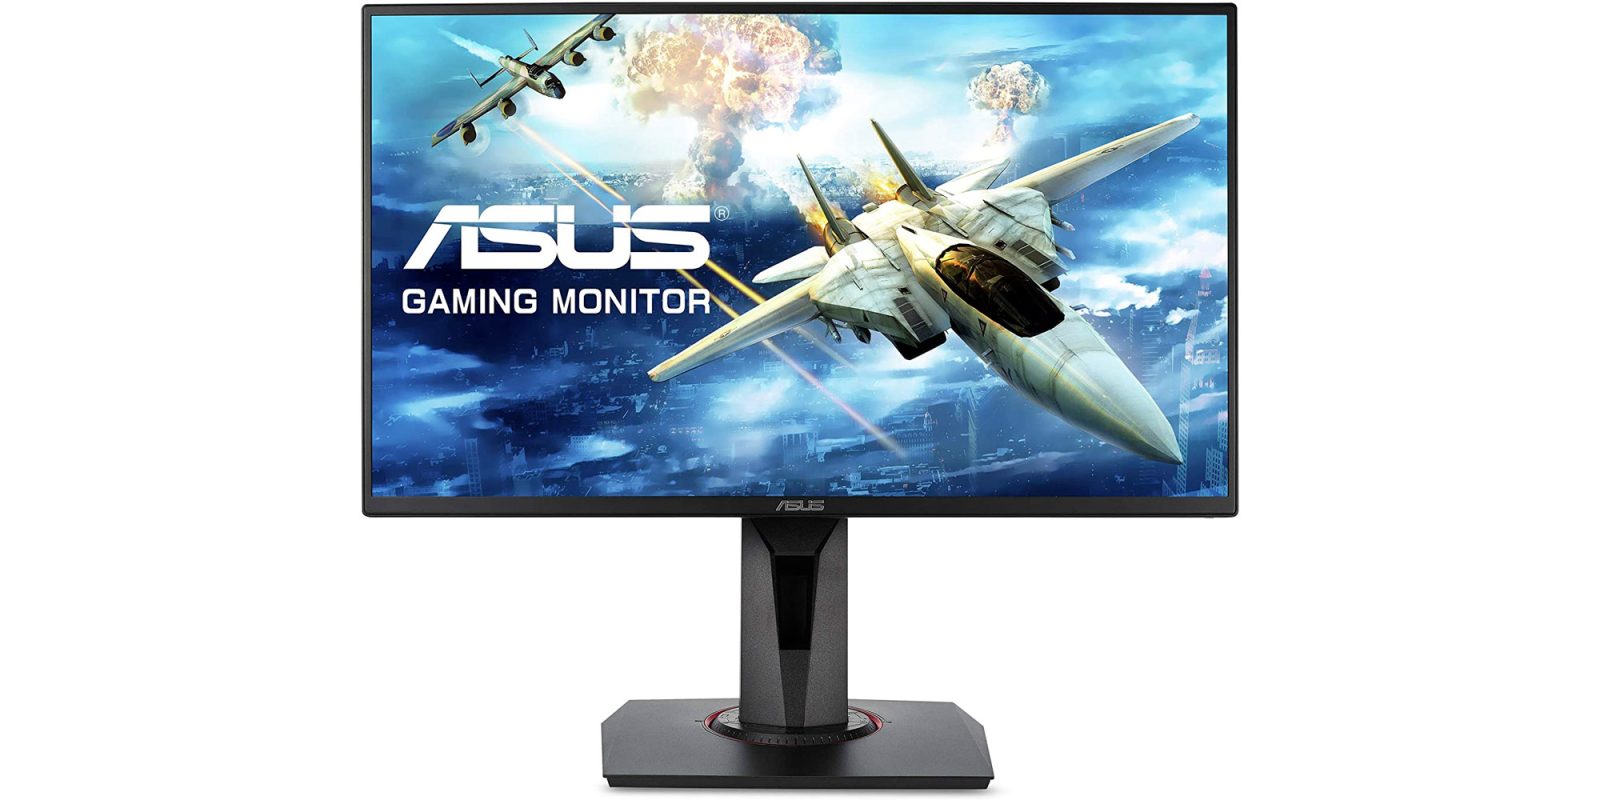 Score 144hz And G Sync On This Asus 24 5 Inch Gaming Monitor 200